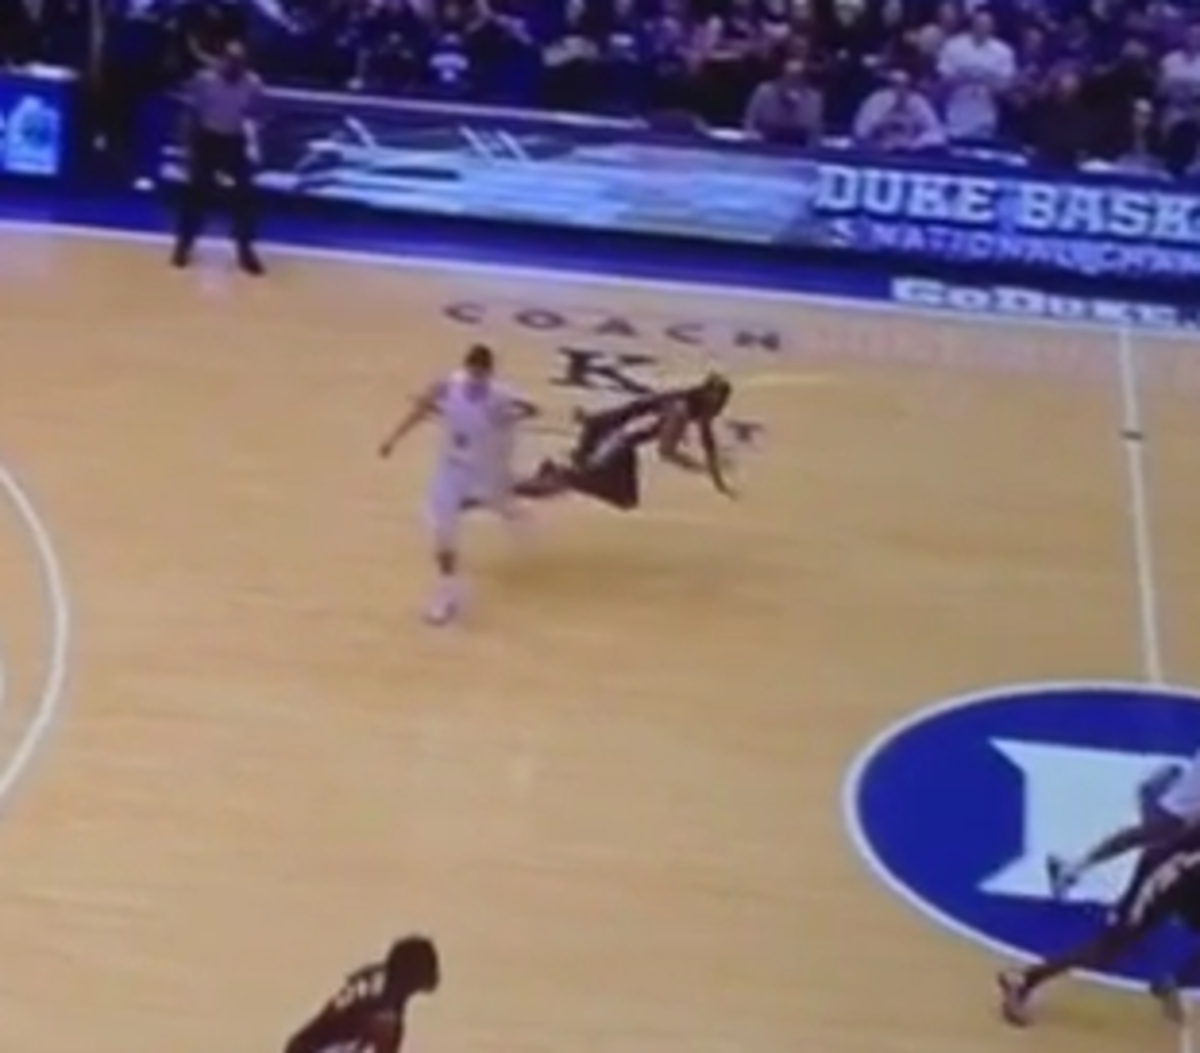 Grayson Allen trips an opponent during a game.